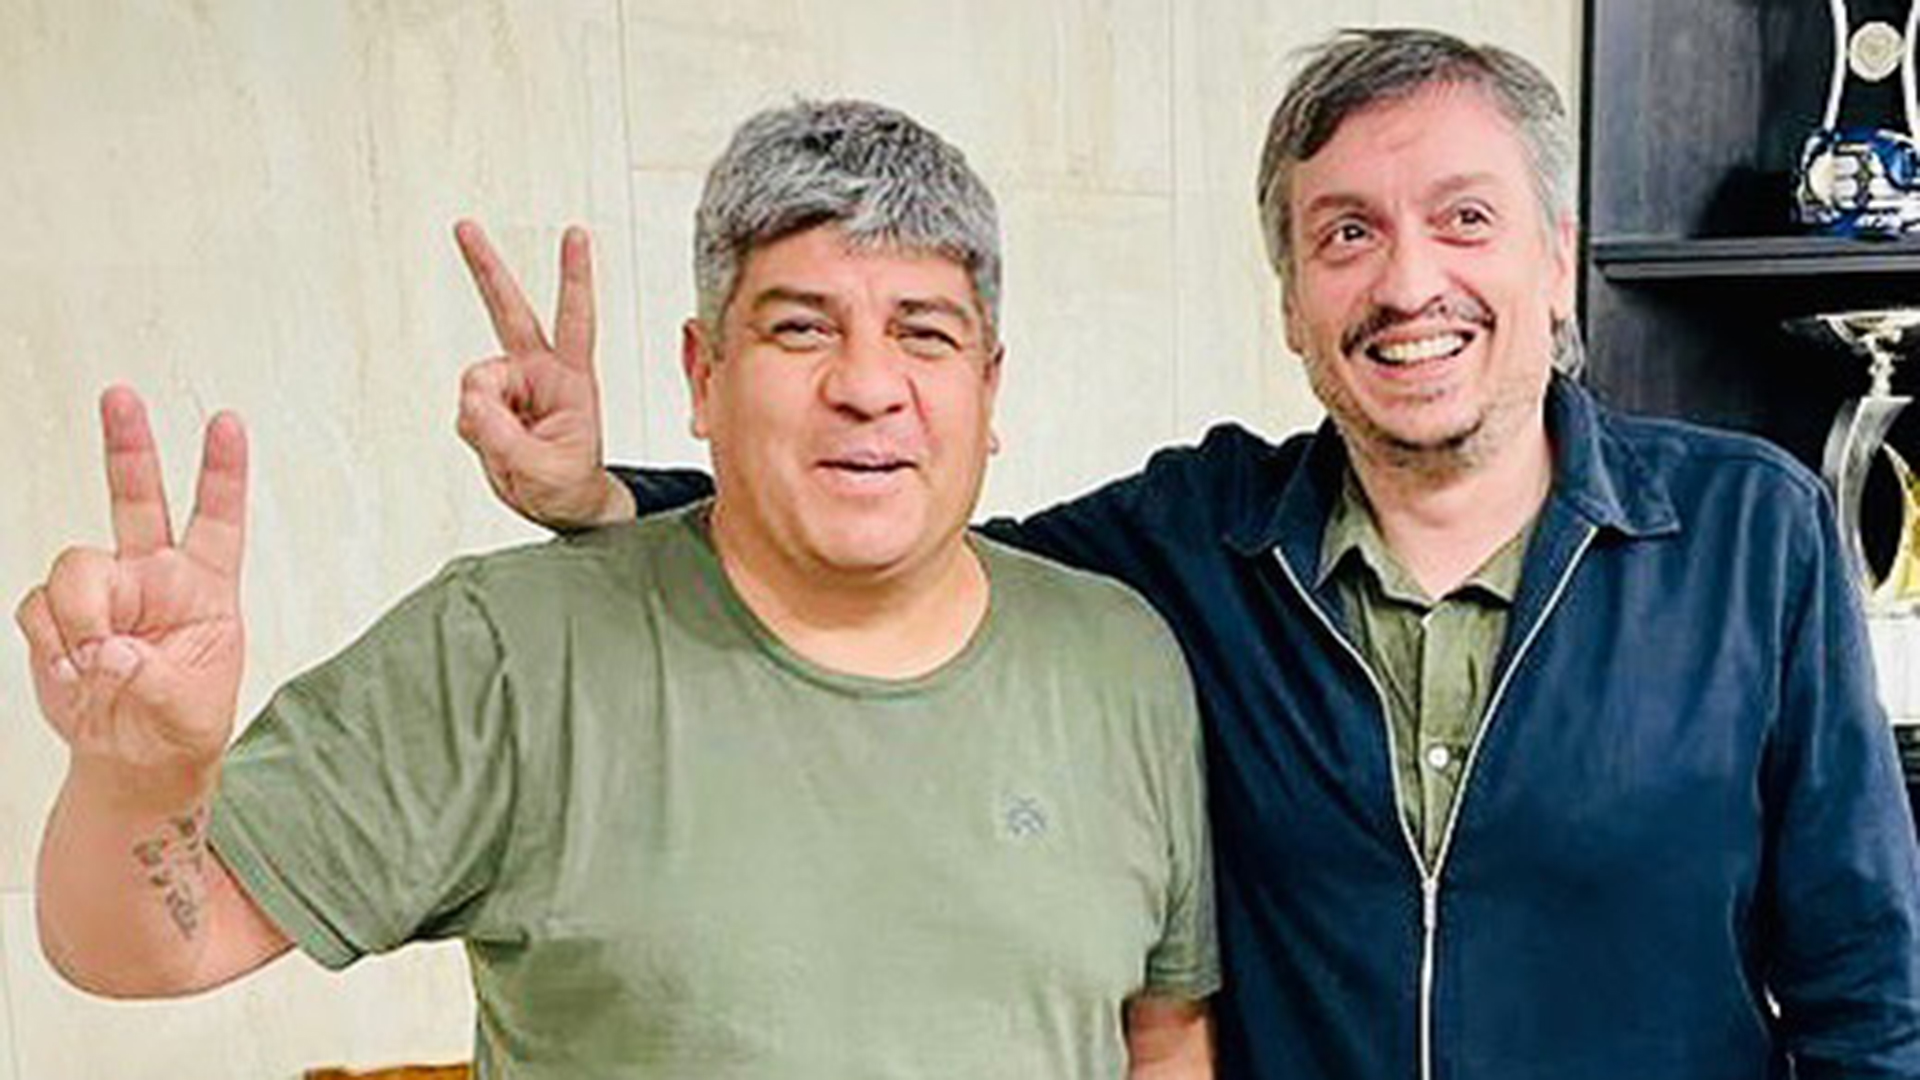 Pablo Moyano poses with Máximo Kirchner in a photo that has generated great commotion within the framework of the Front de Tous internal